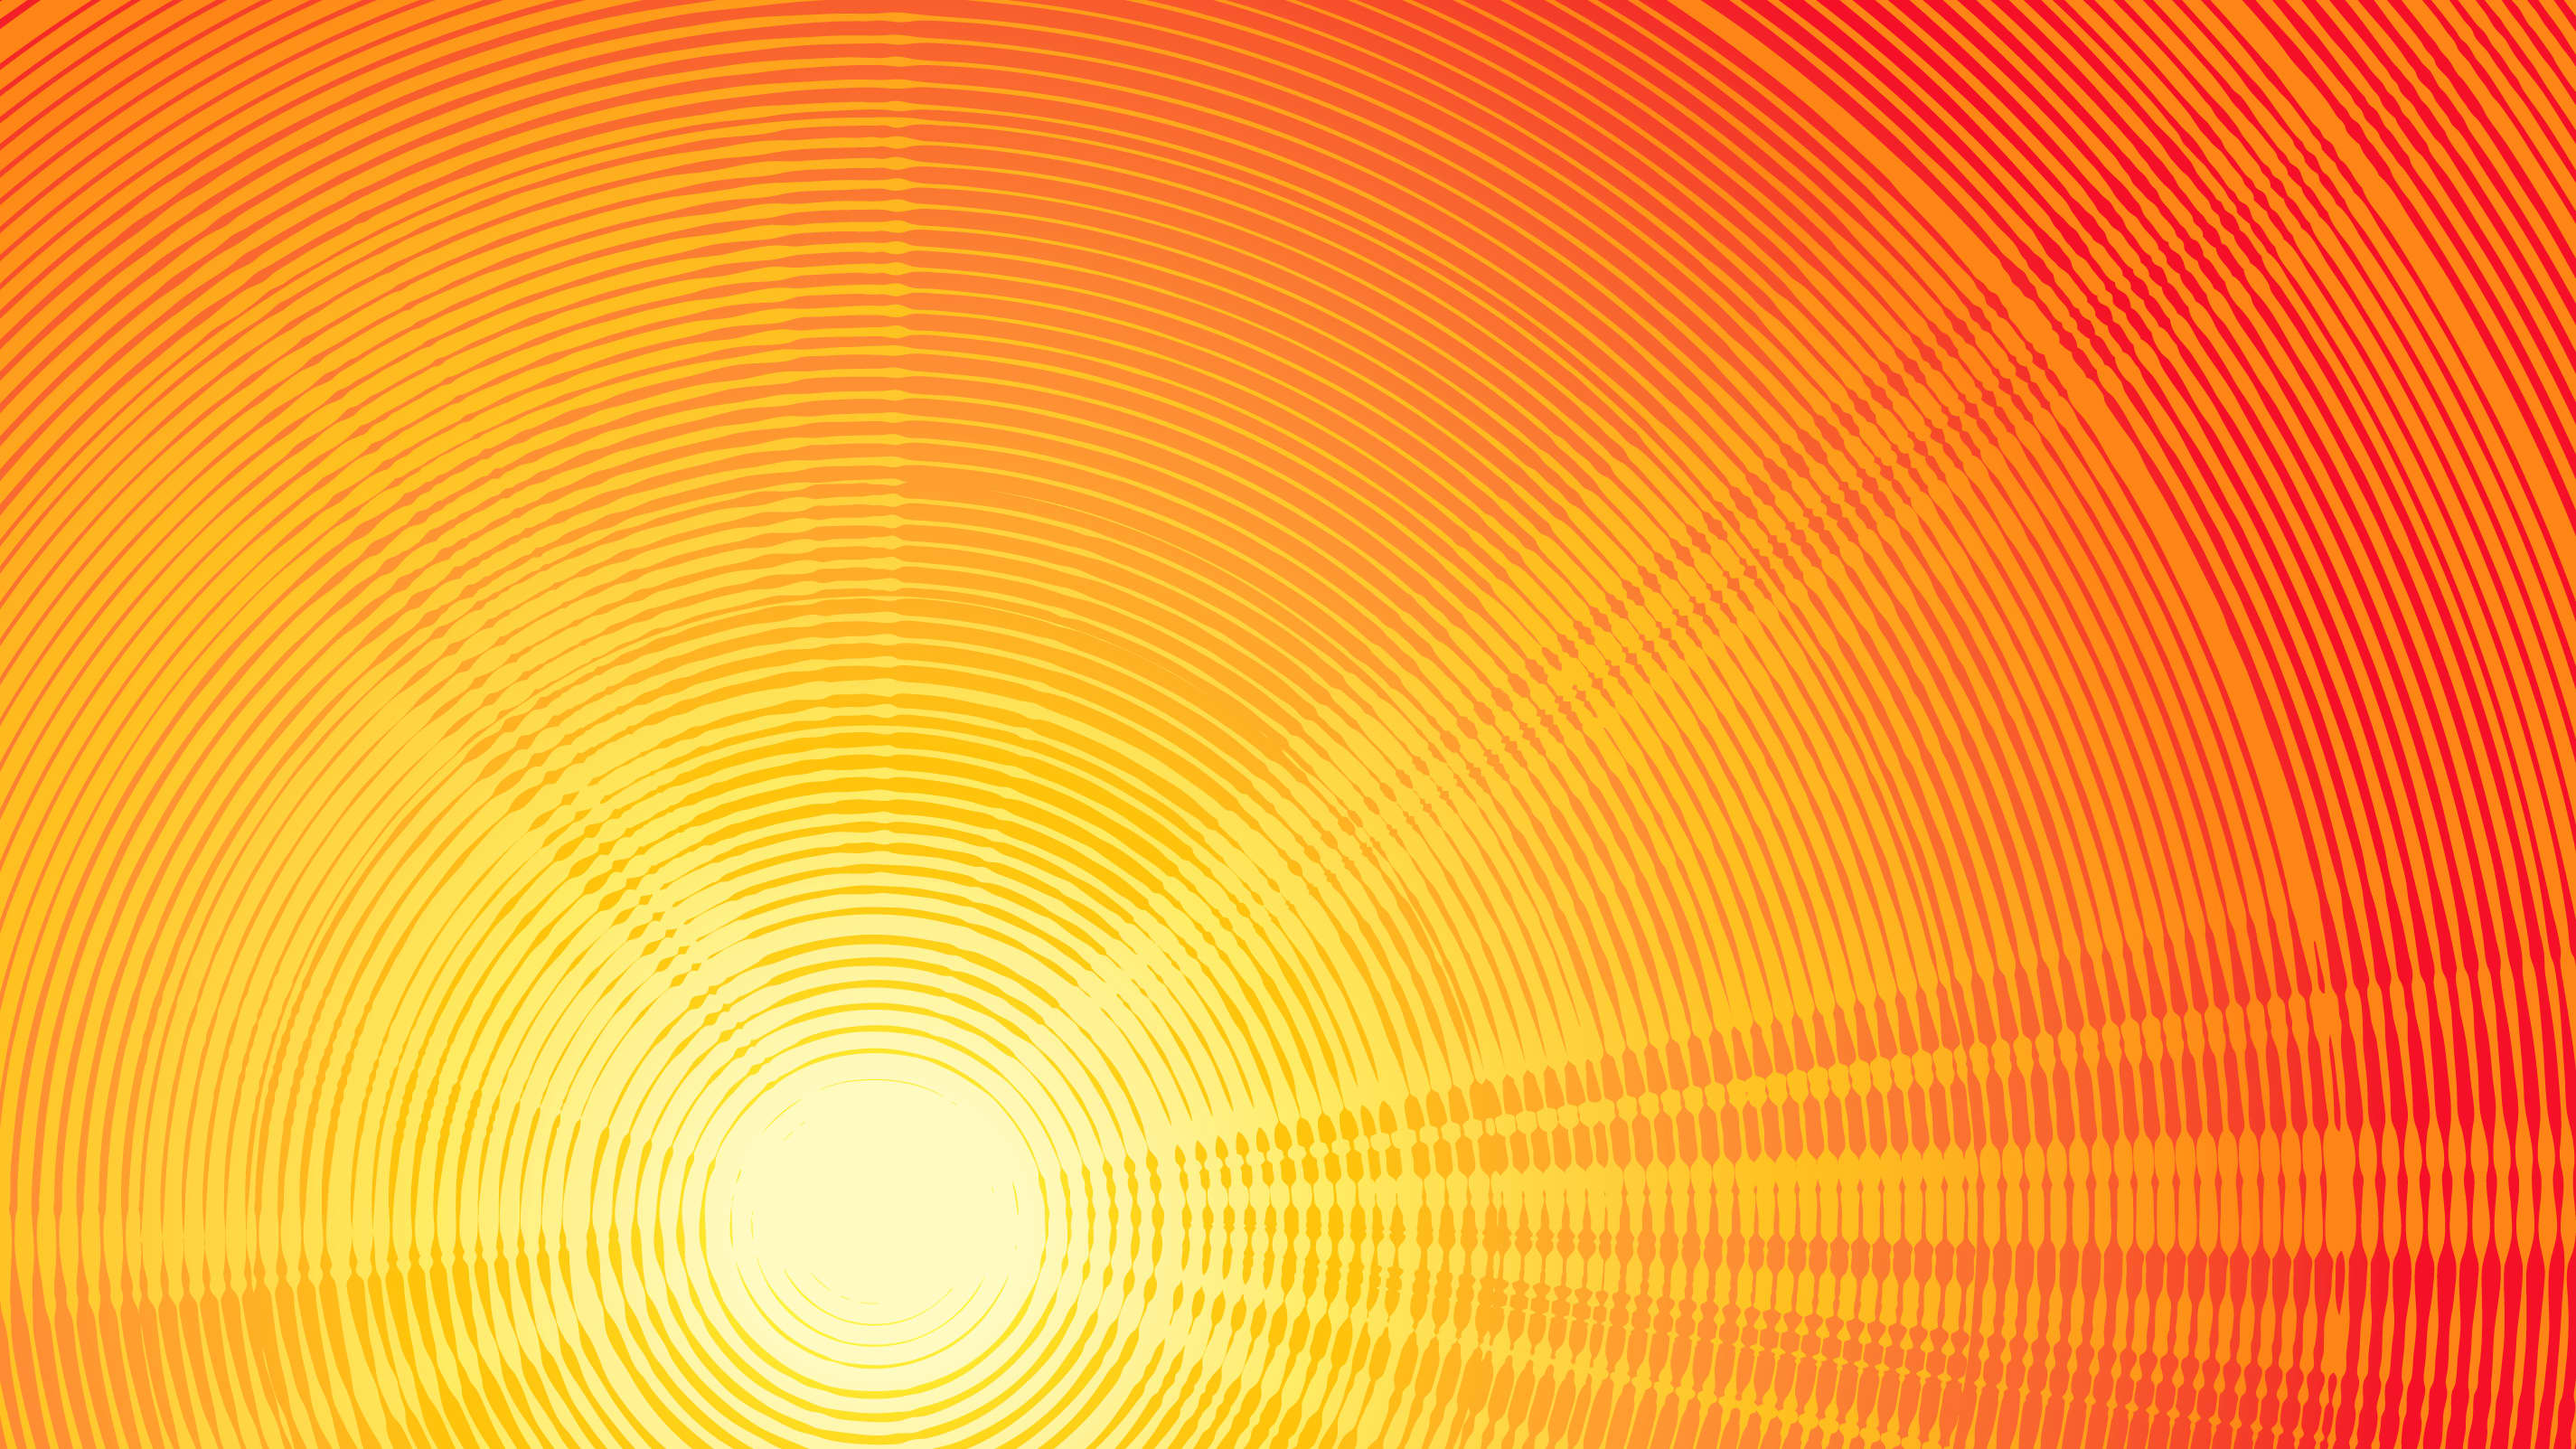 illustration of the sun, representing extreme heat